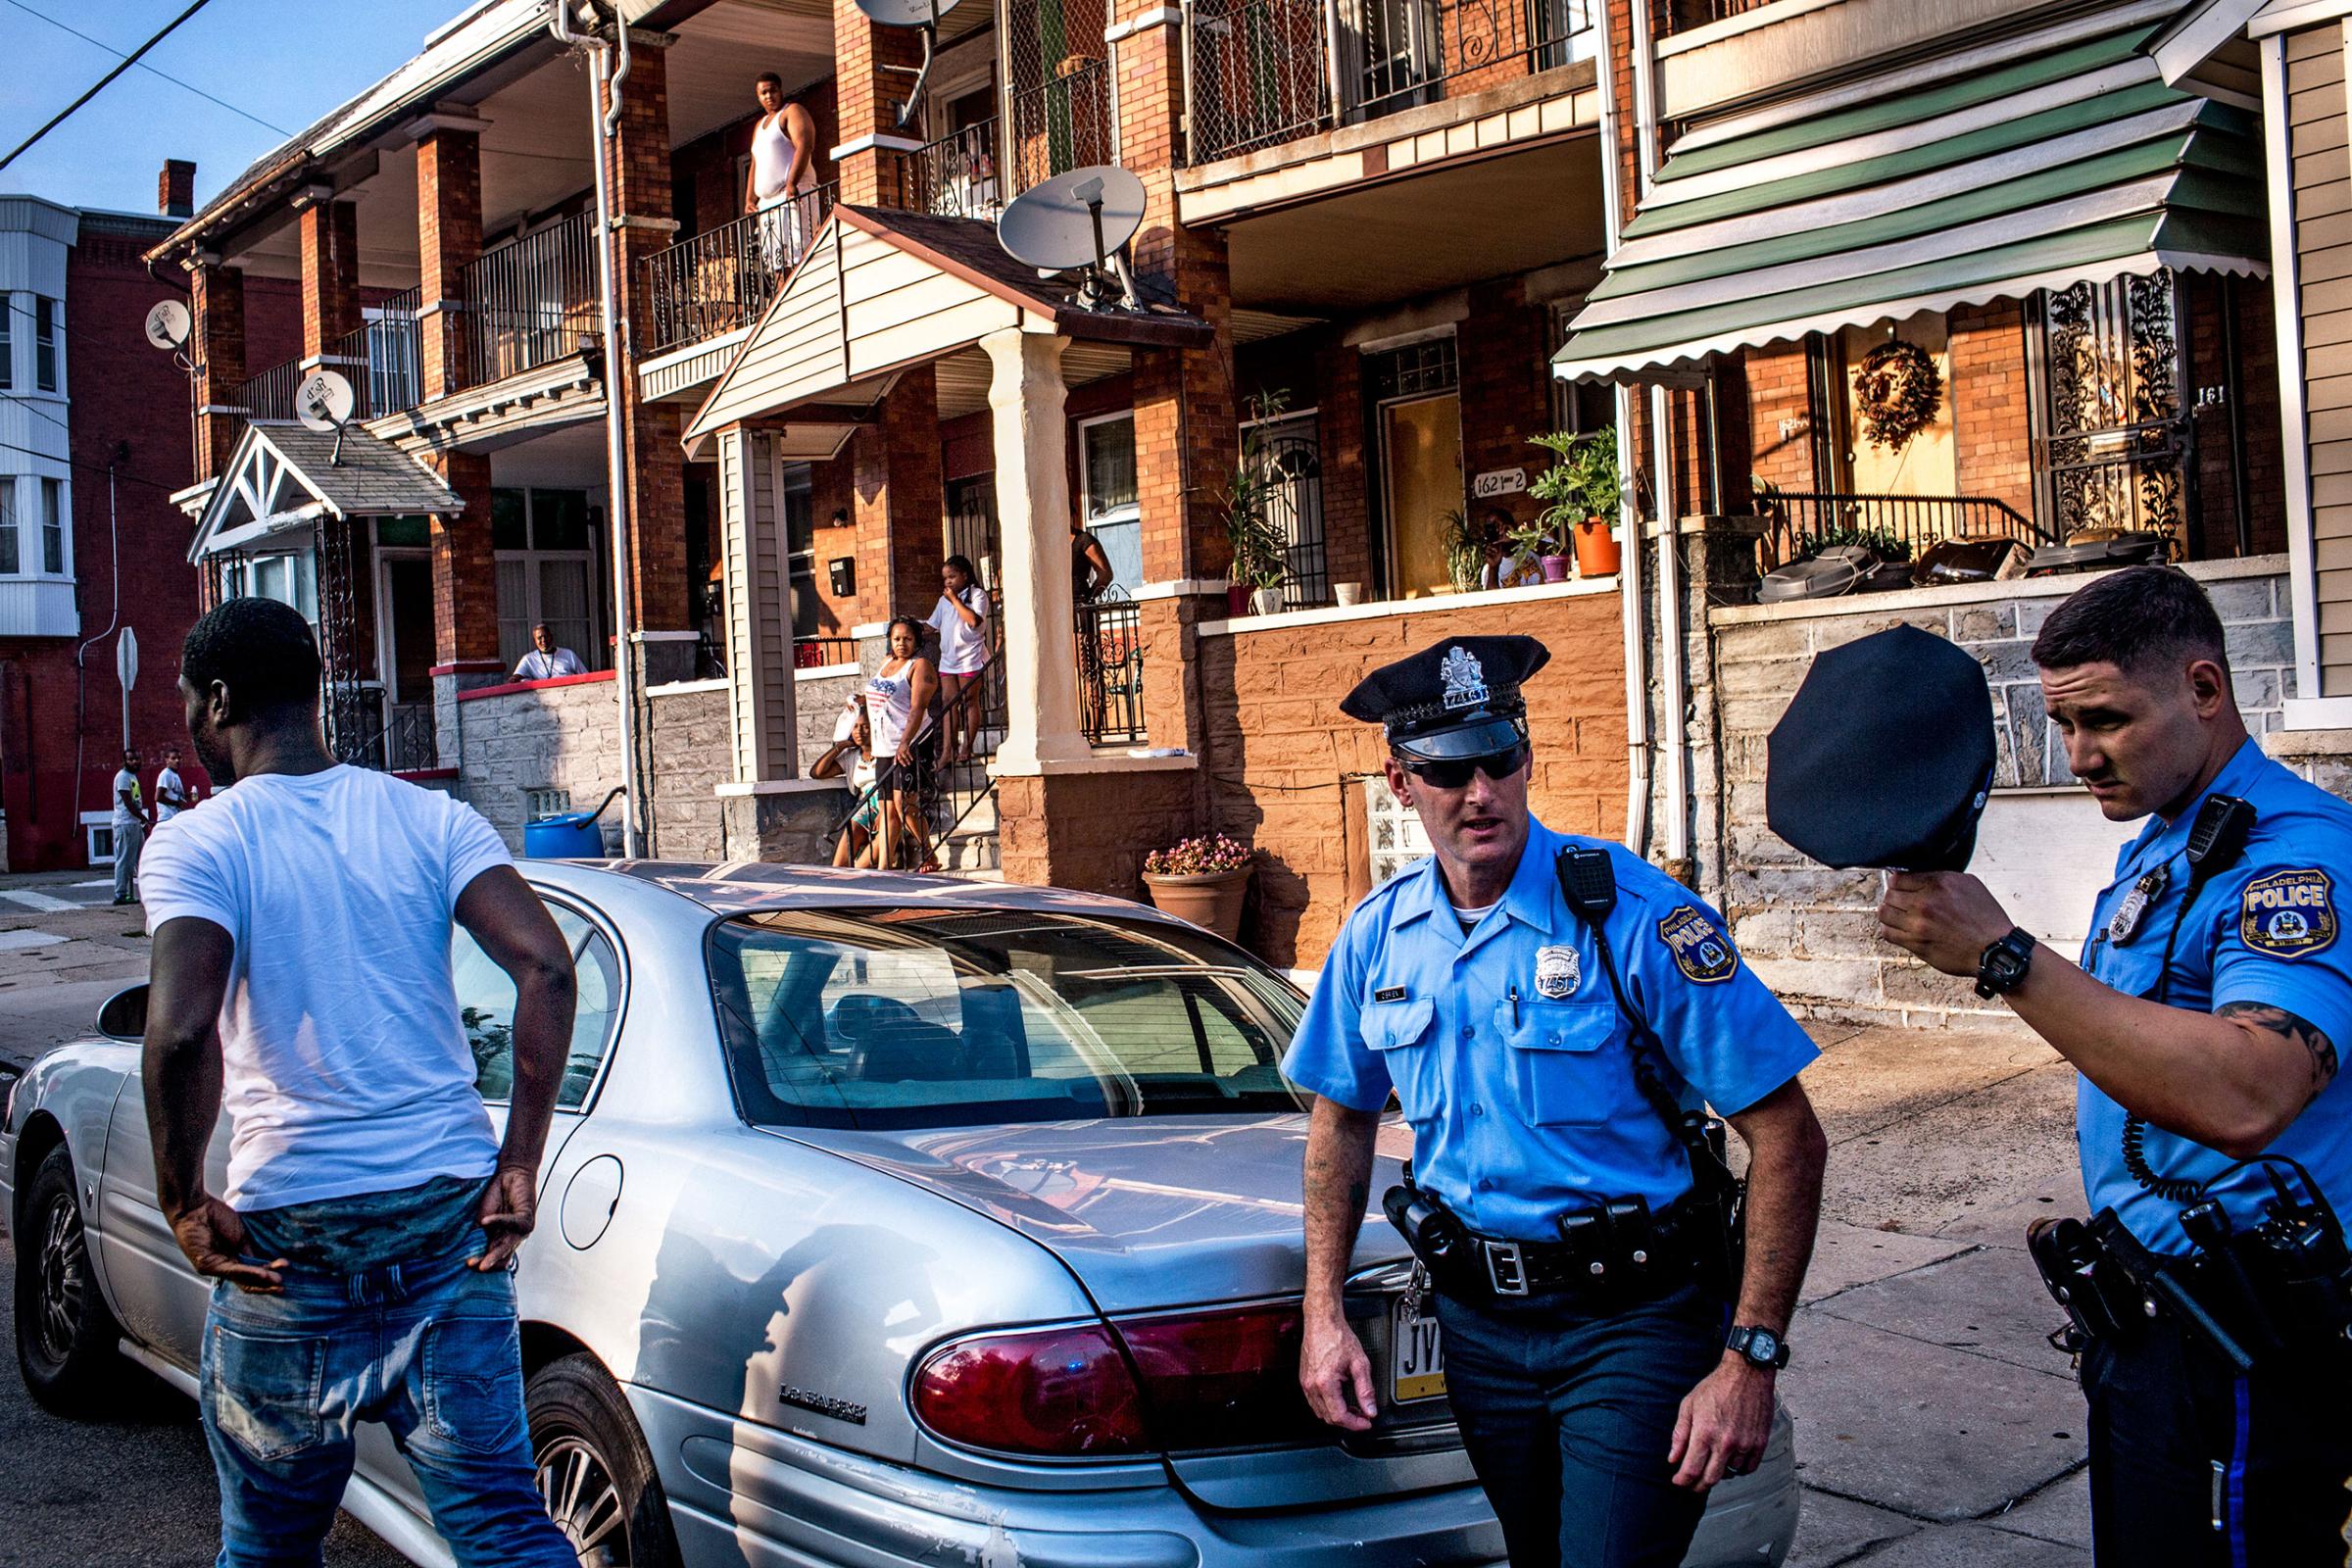 July 29th, 2015. Philadelphia PA. Officers Paul Watson, right, and his partner Officer Richard O'Brien make a traffic stop with  as neighbors look on. After the police searched his car, the man was released.